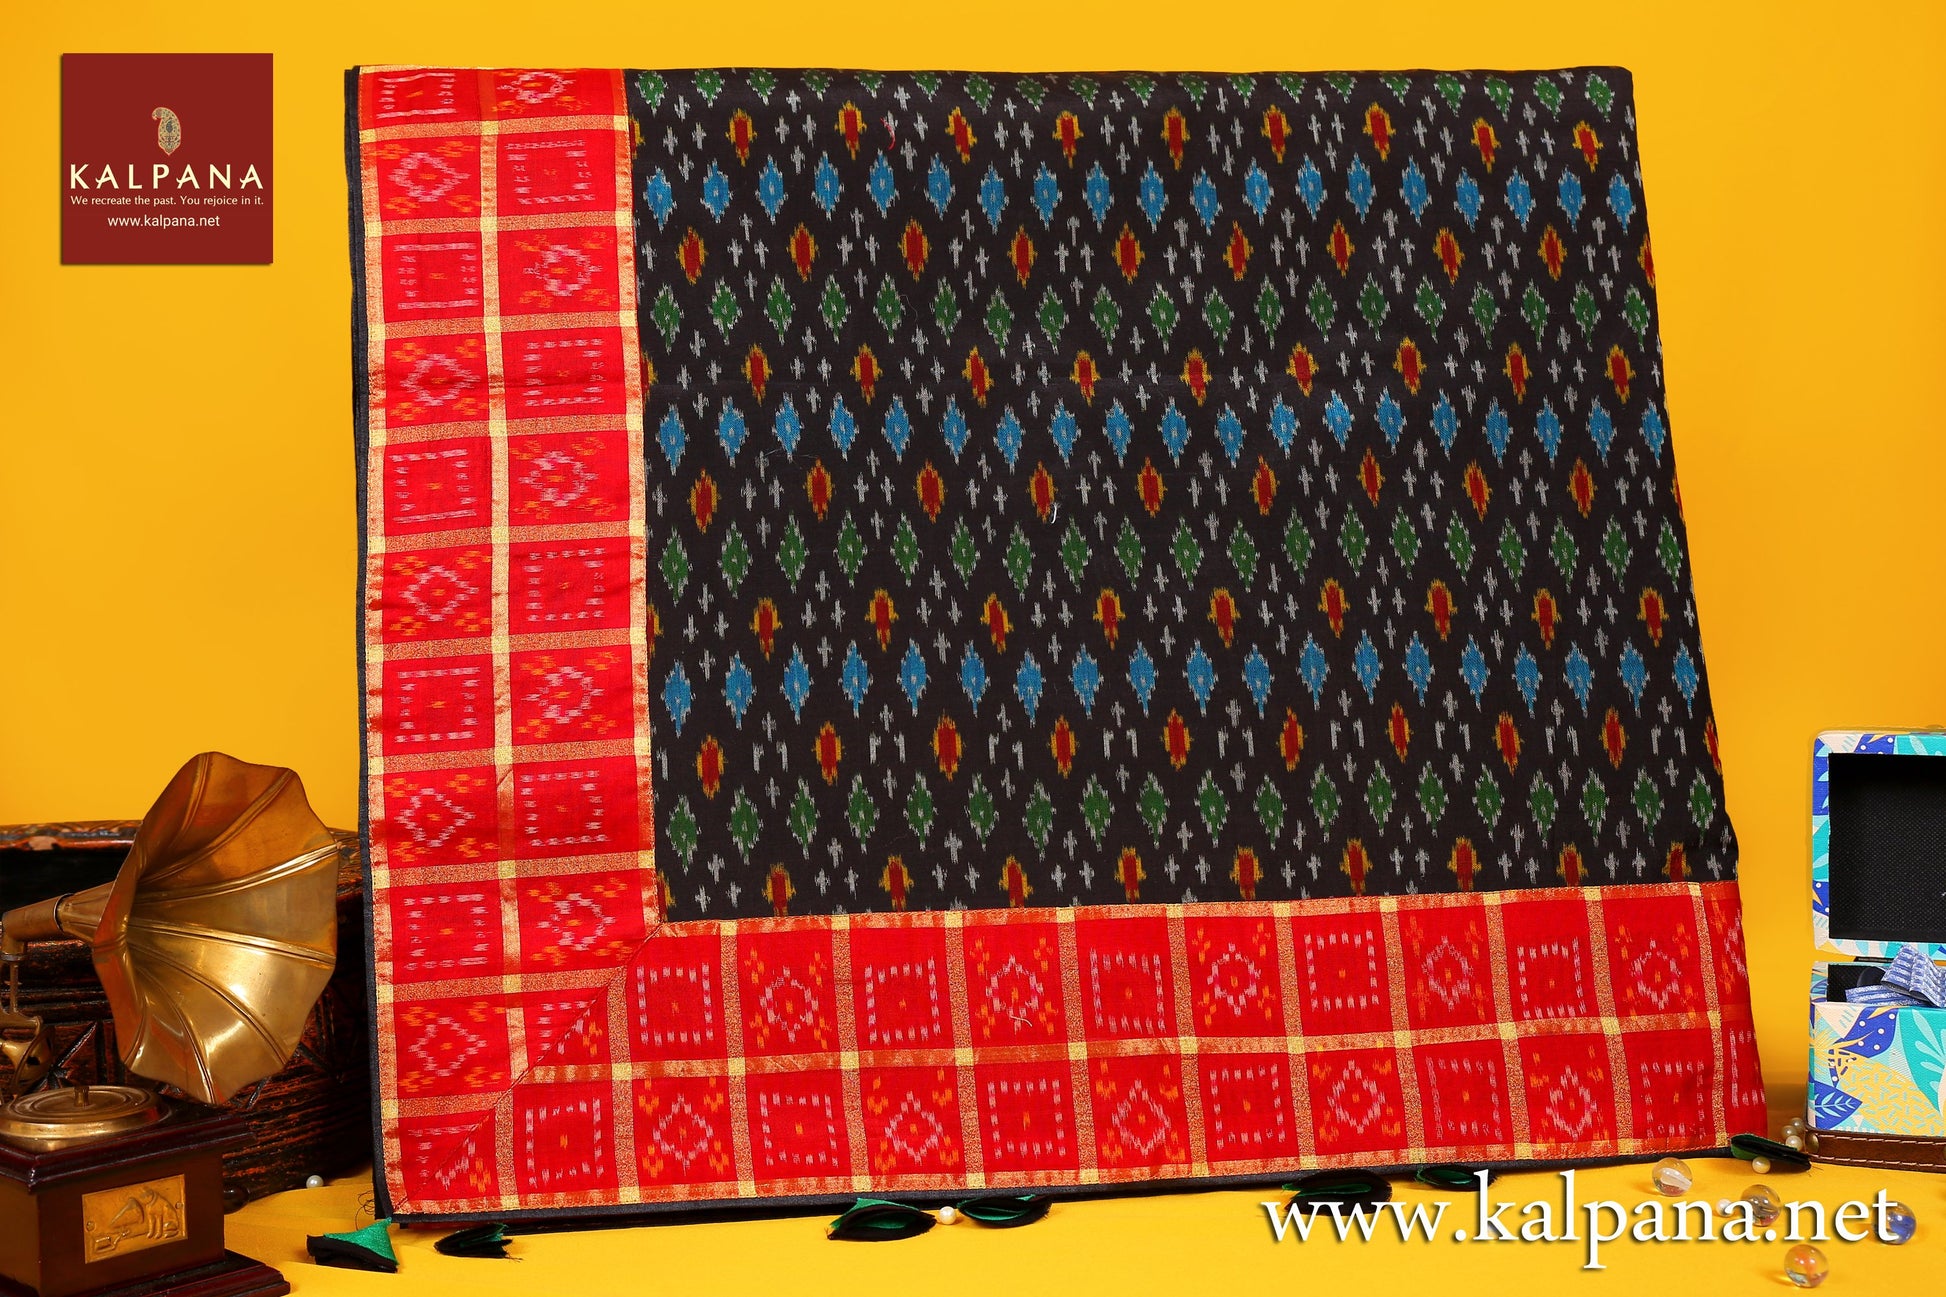  Embroidery Pure Tussar Saree with All Over Embroidered Motifs and Ikat Patch Border. The Palla is  Ikat Patch. It comes with Contrast Colored Woven Unstitched Blouse with . Perfect for Multi Occasion Wear.  Recommended for Autumn & Winter season(s). Dry Clean Only